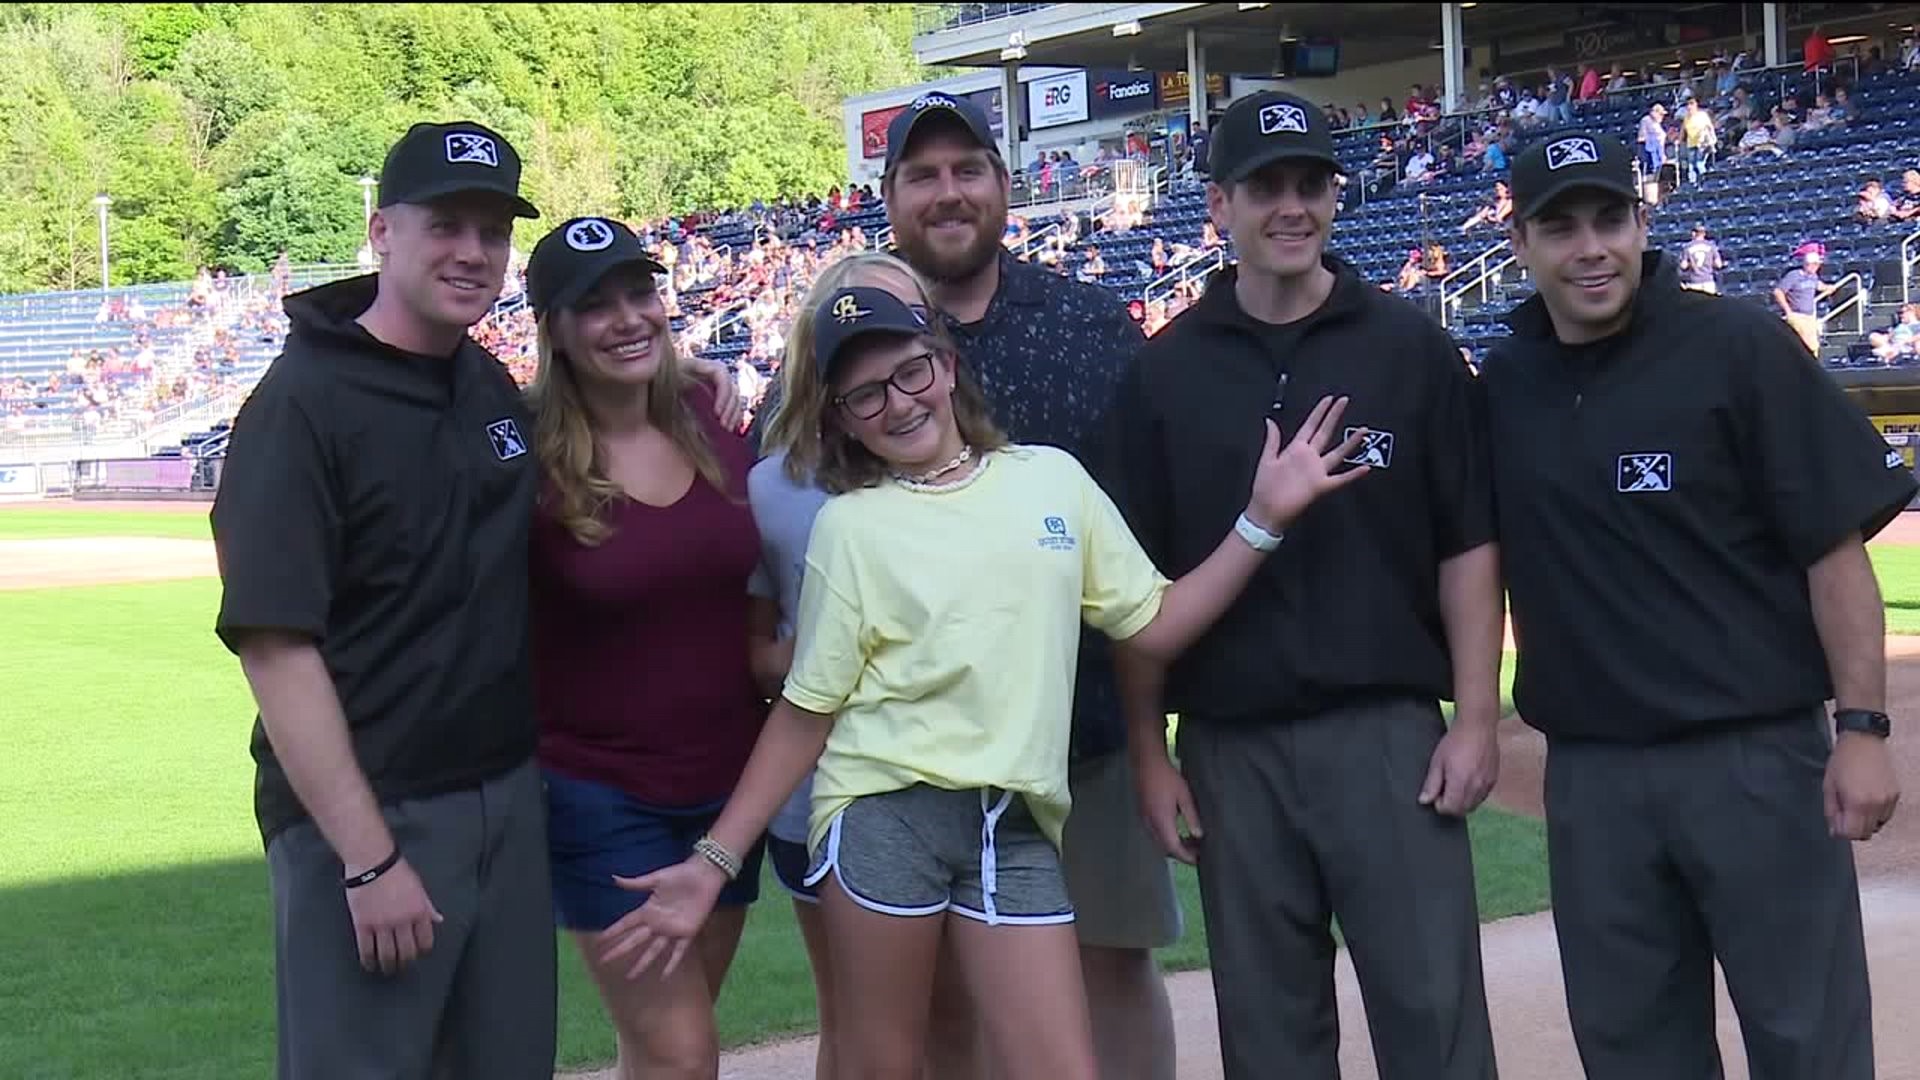 11-year-old Girl with Leukemia Gets Memorable Experience at RailRiders Game